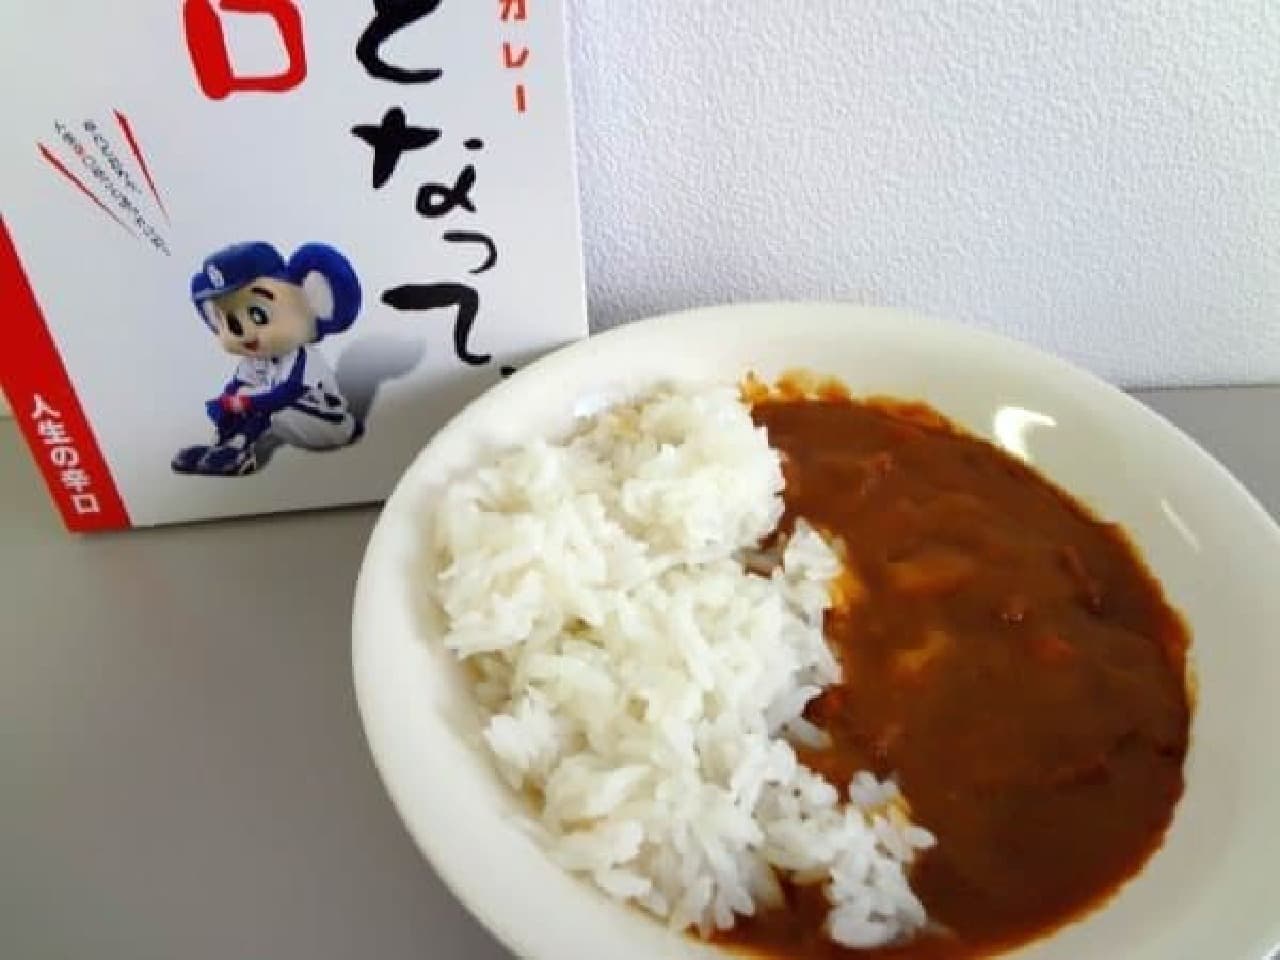 It looks like a normal curry, but ...?